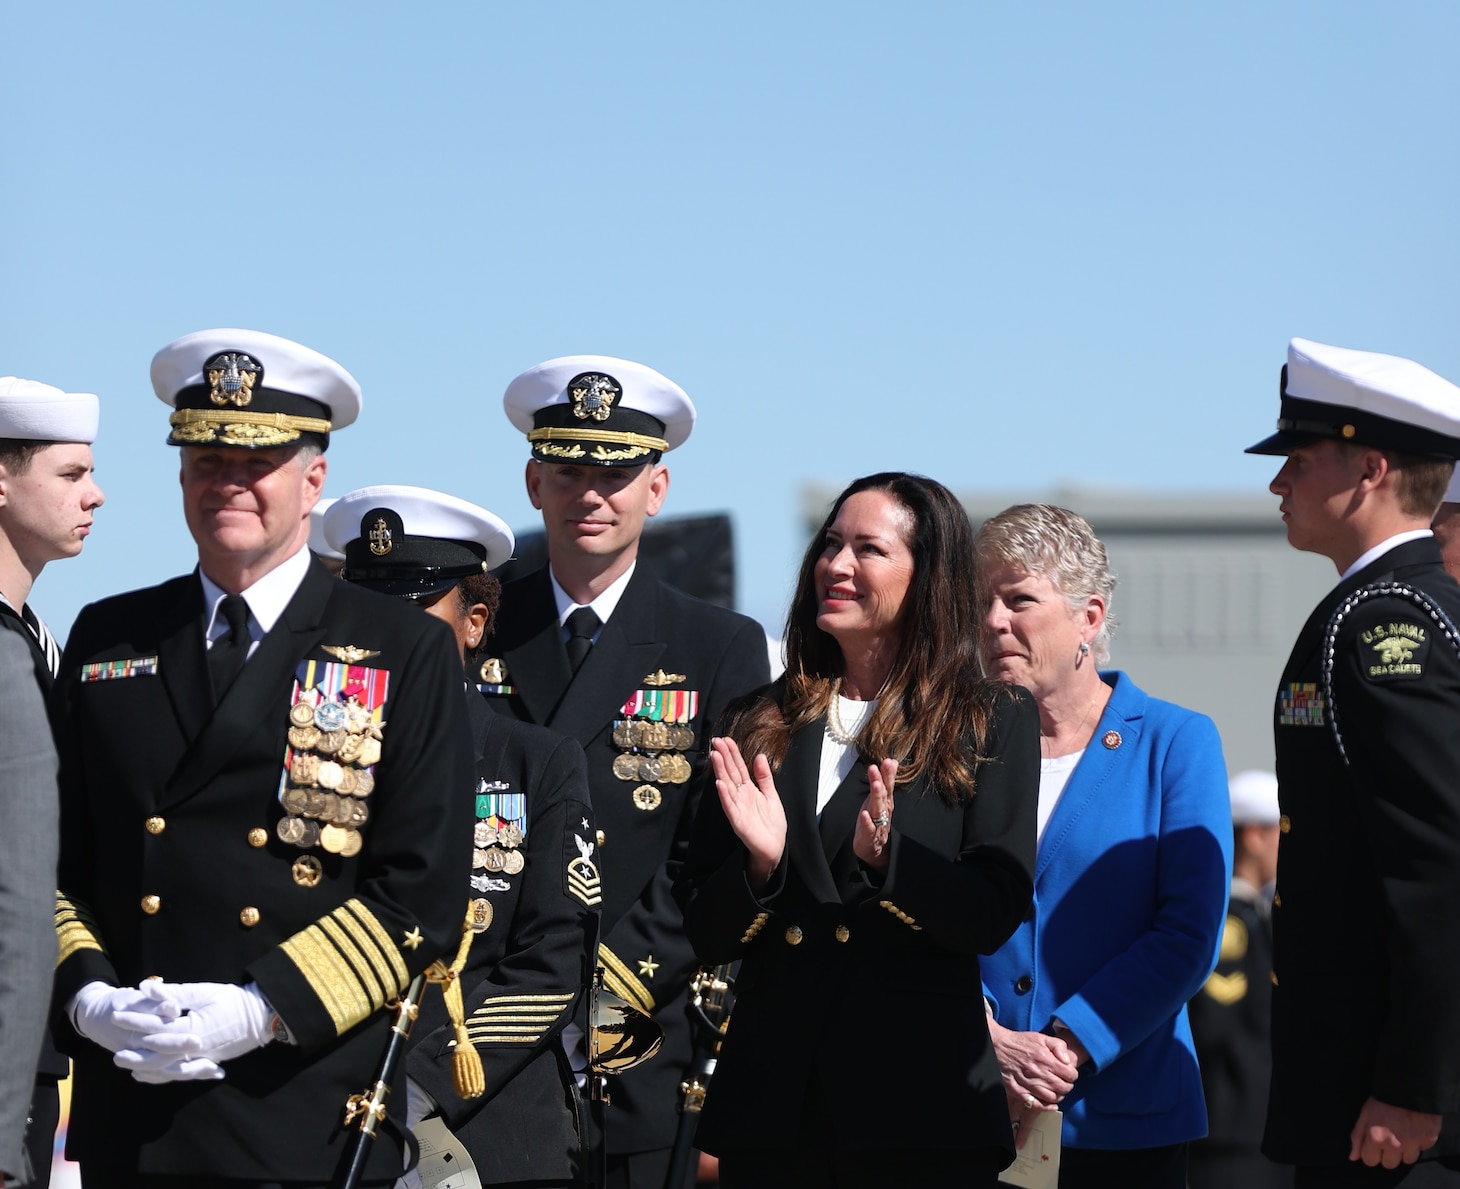 PORT HUENEME, Calif. (Apr 1, 2023) Adm. Samuel J. Paparo, commander, U.S. Pacific Fleet, left, Cdr. Brian Sparks, commanding officer, Independence-class variant littoral combat ship USS Santa Barbara (LCS32), center, Lola Zinke, ships sponsor, and Congresswoman Julia Brownley, prepare to take the stage during the LCS32 Commissioning Ceremony onboard Naval Base Ventura County (NBVC), Port Hueneme, Apr. 1, 2023. Littoral Combat Ships are fast, optimally-manned, mission-tailored surface combatants that operate in near-shore and open-ocean environments, winning against 21st-century coastal threats. LCS integrate with joint, combined, manned and unmanned teams to support forward presence, maritime security, sea control, and deterrence missions around the globe. NBVC is a strategically located Naval installation composed of three operating facilities: Point Mugu, Port Hueneme and San Nicolas Island. NBVC is the home of the Pacific Seabees, West Coast E-2D Hawkeyes, 3 warfare centers and 80 tenants. (U.S. Navy photo by Mass Communication 1st Class Douglas "Evan" Parker/Released)